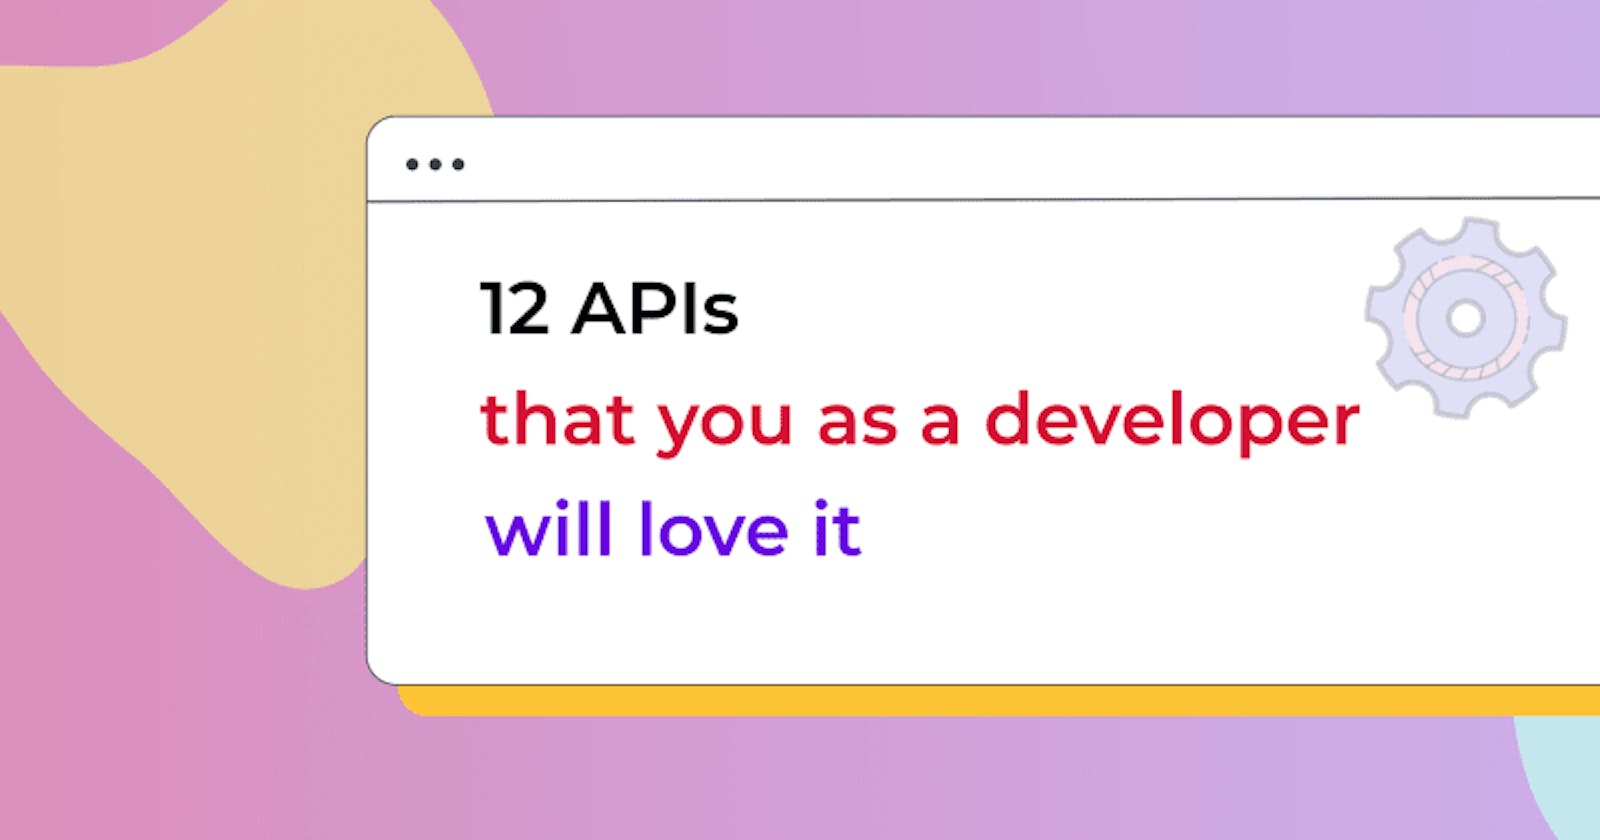 12 APIs that you as a developer will love it